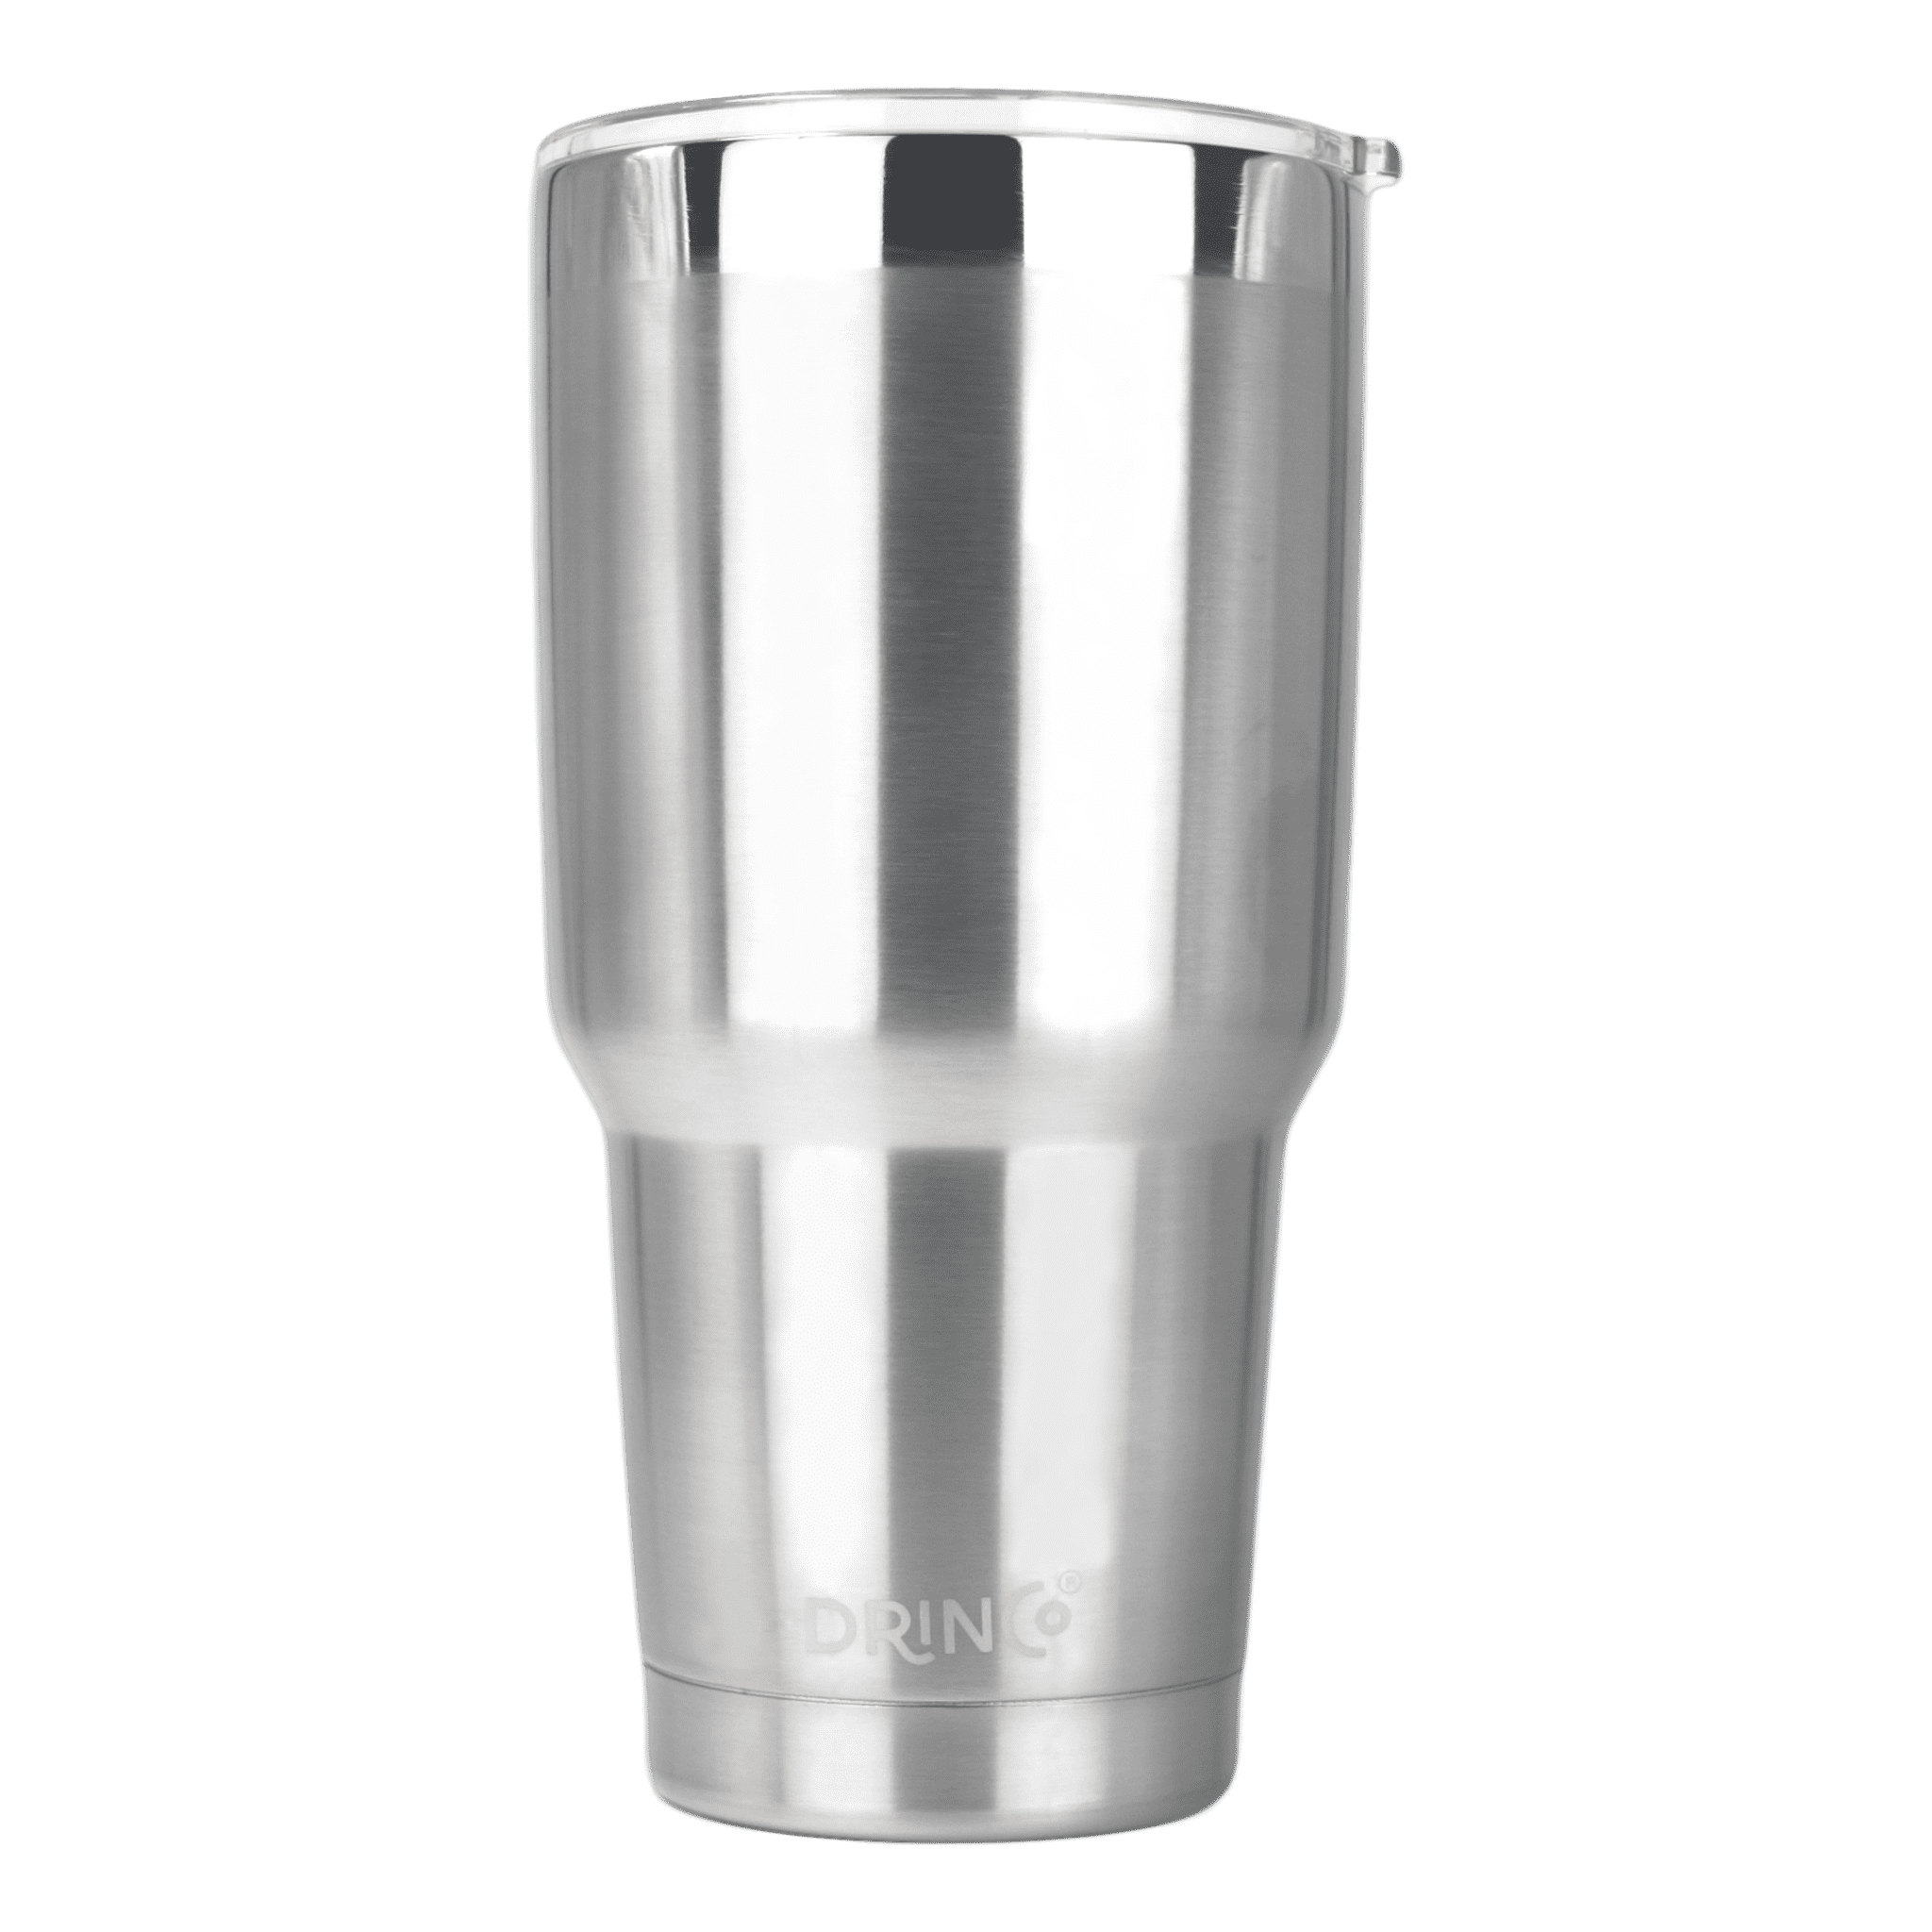 Spill　Insulated　Tumbler　w/2　Proof　(Brushed)　Lid　Straws　DRINCO®　30oz